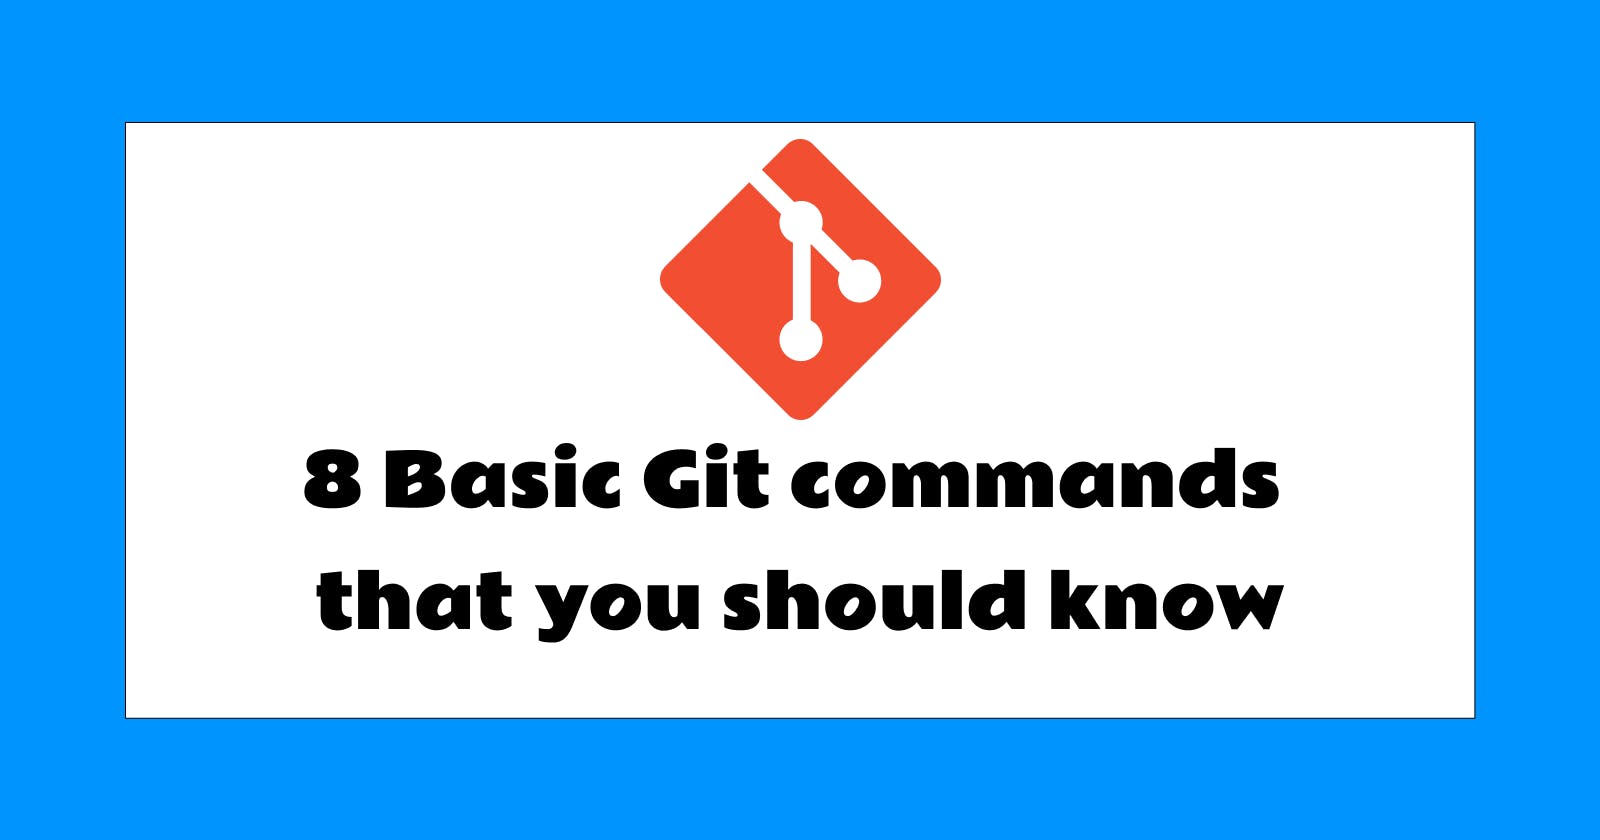 Git commands to get you started with programming.